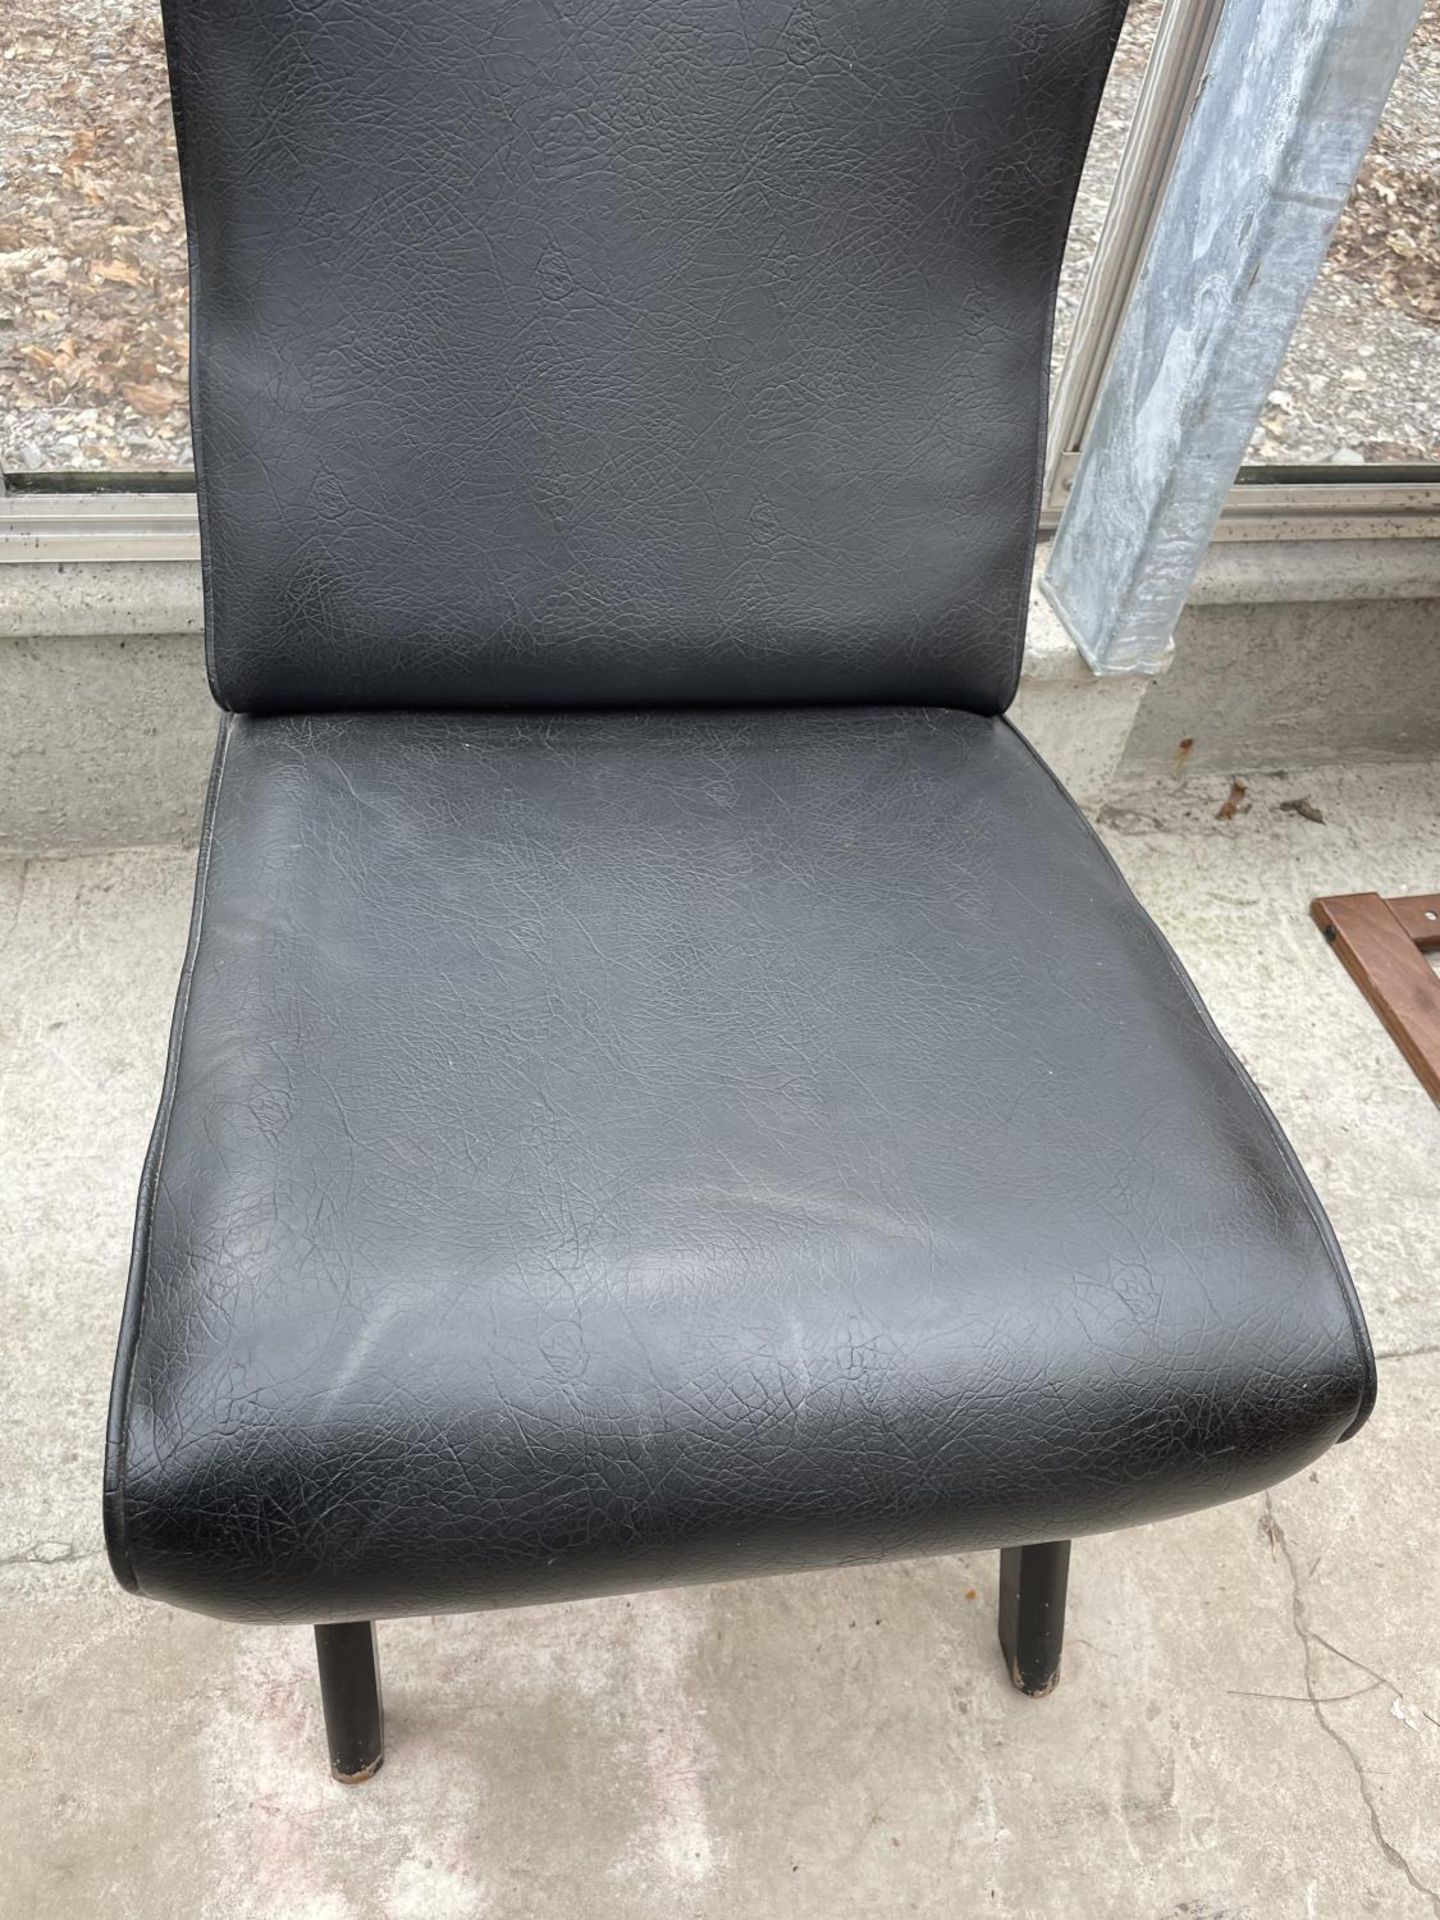 A BLACK LEATHER EFFECT FIRESIDE CHAIR - Image 2 of 5